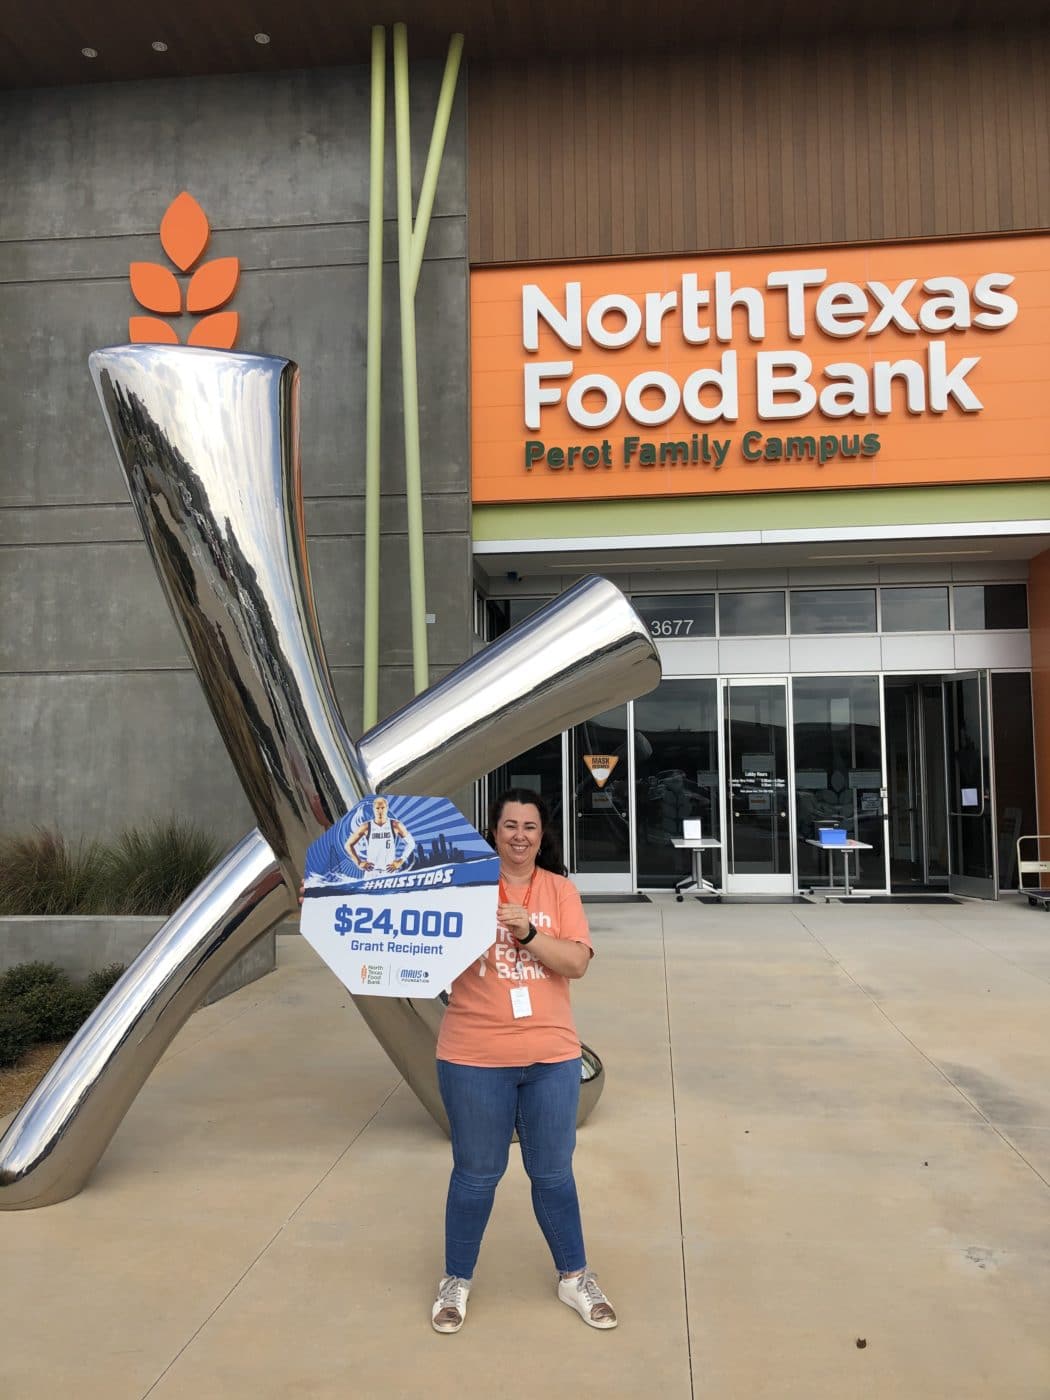 Zahra standing outside of the North Texas Food Bank's Perot Famiy Campus holding a $24,000 Grant from the Dallas Mavericks